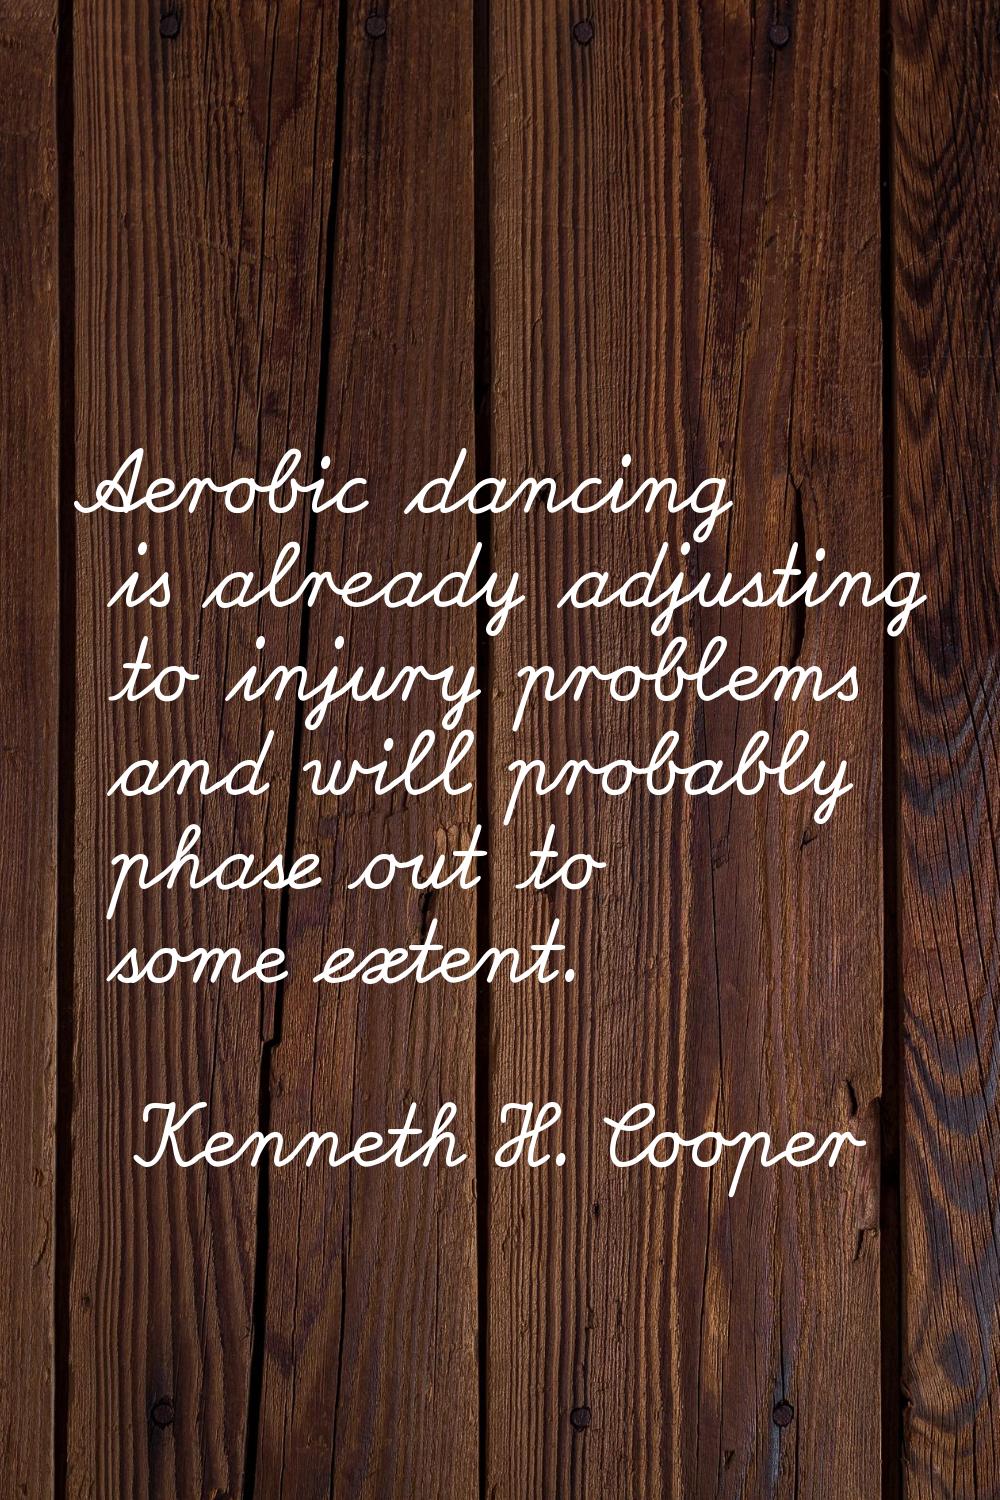 Aerobic dancing is already adjusting to injury problems and will probably phase out to some extent.